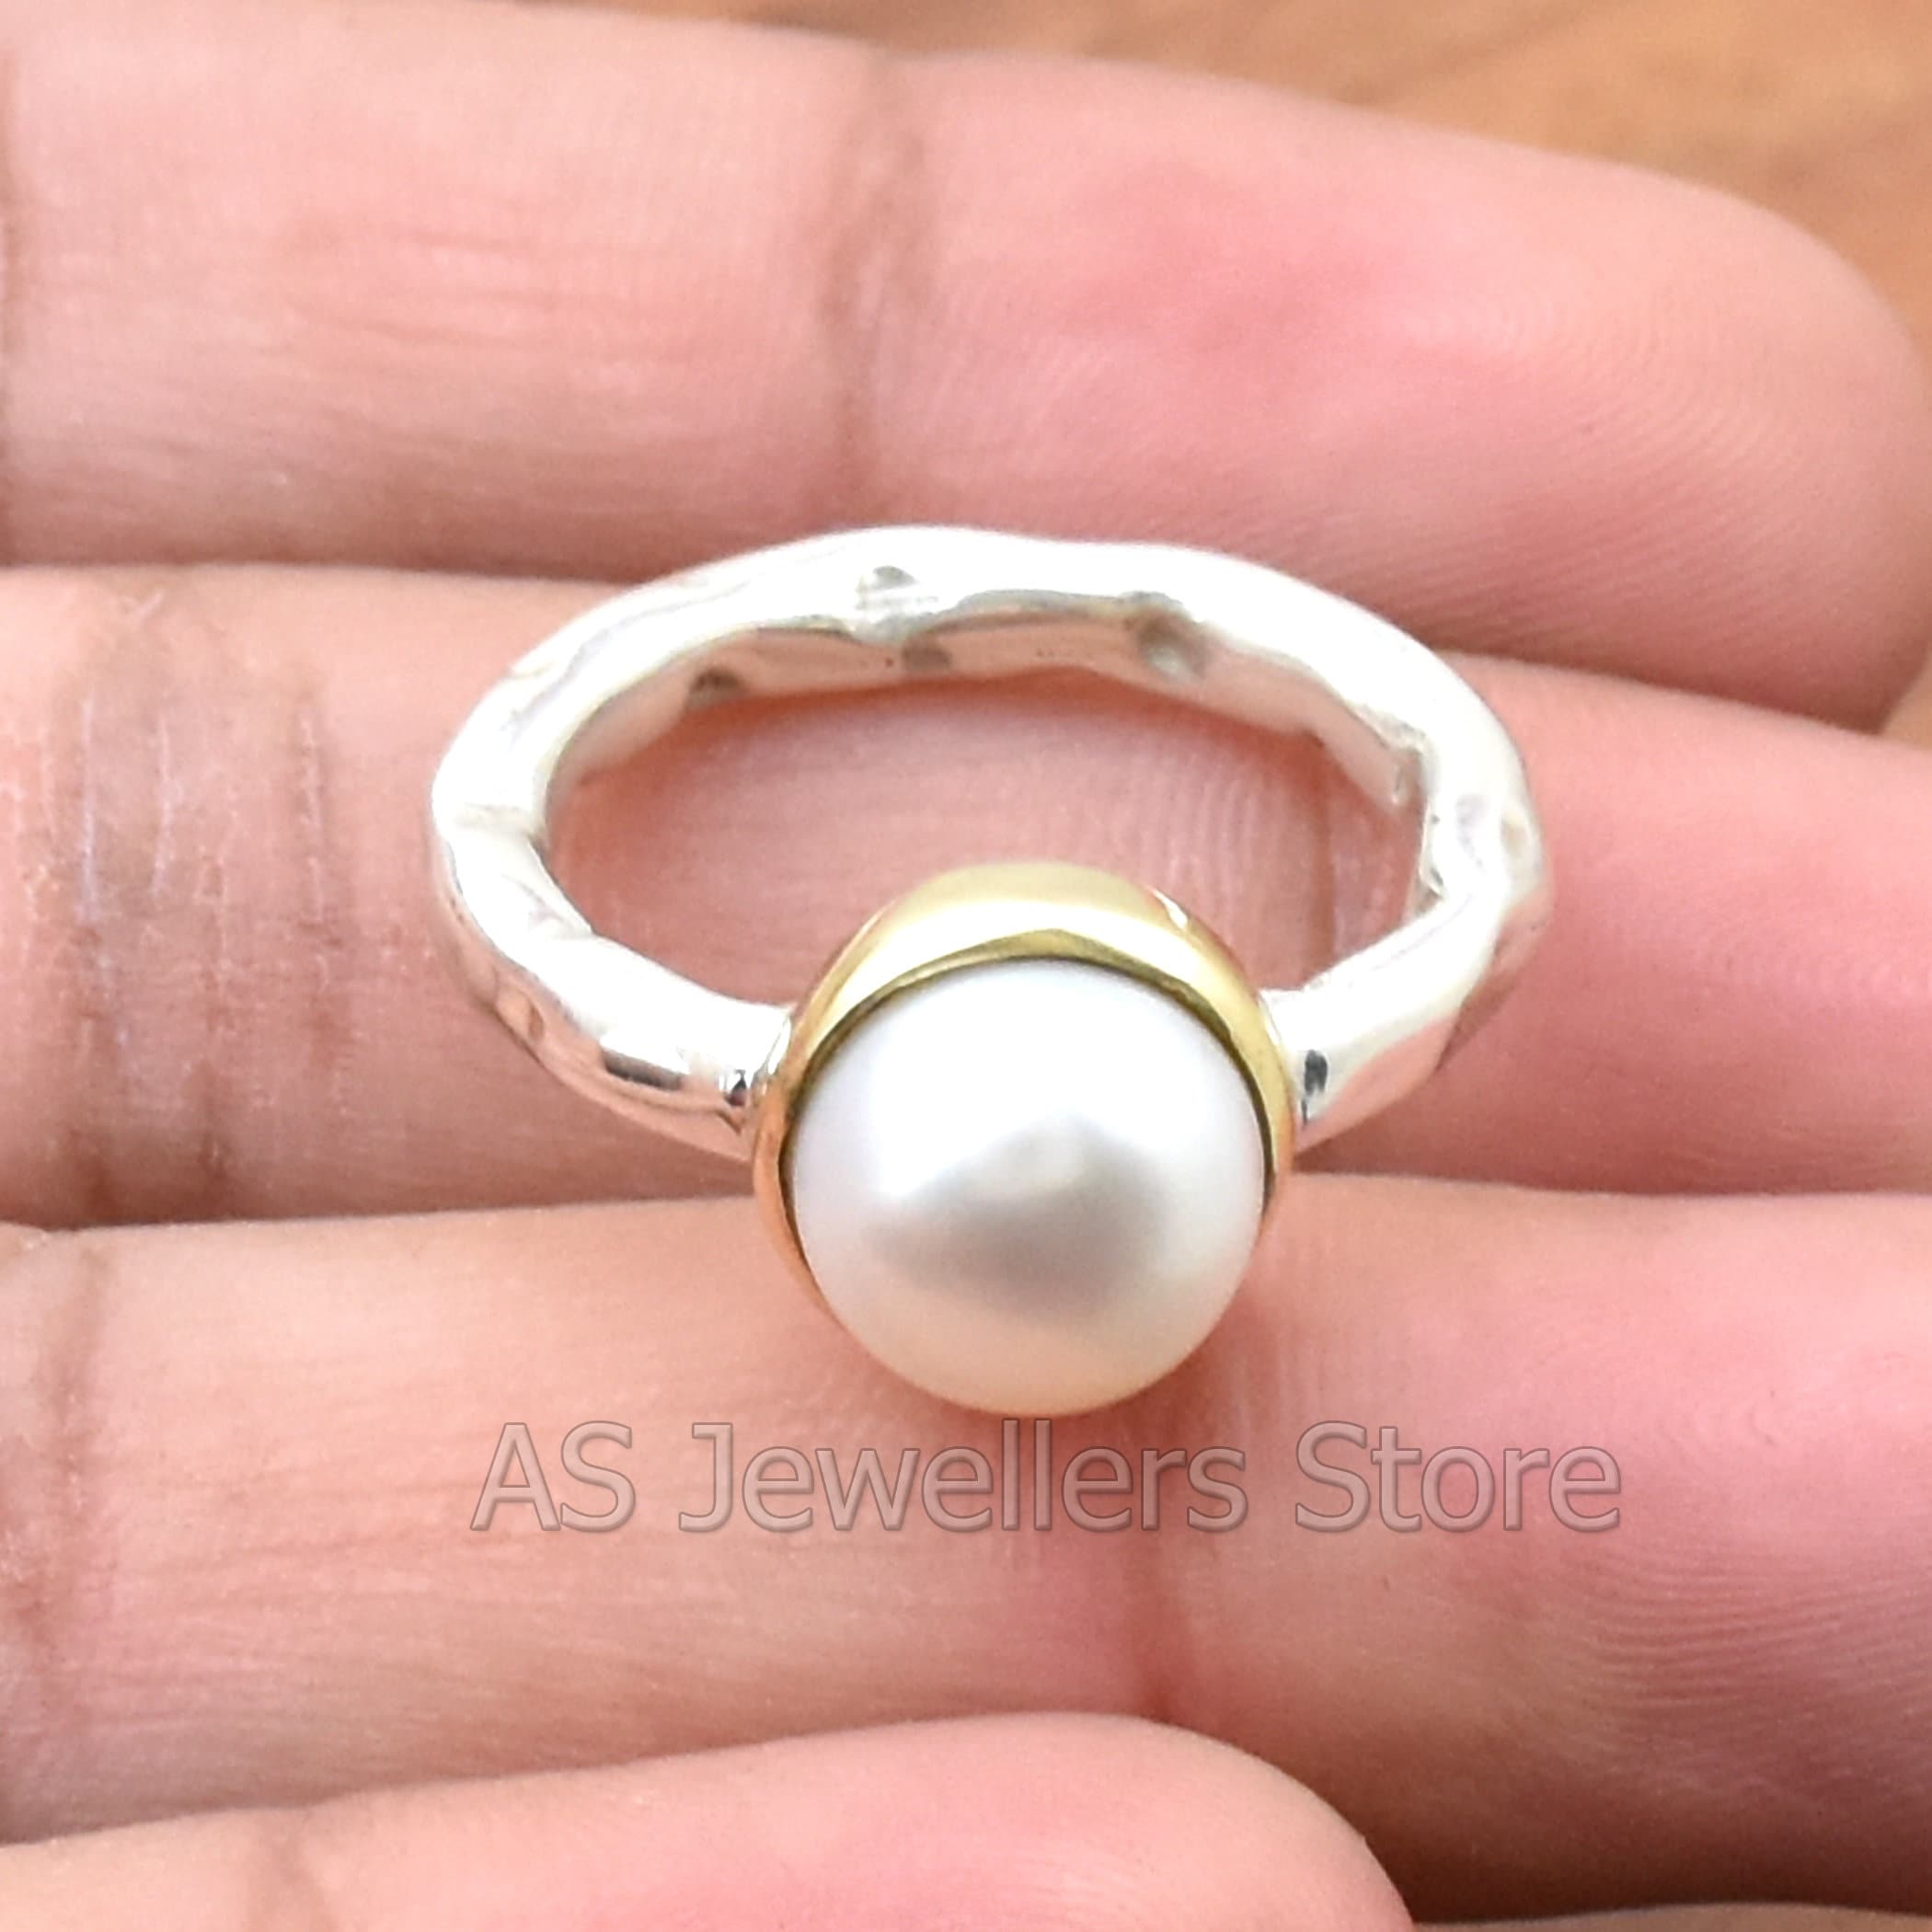 Buy Pearl Silver Ring Online In India - Etsy India